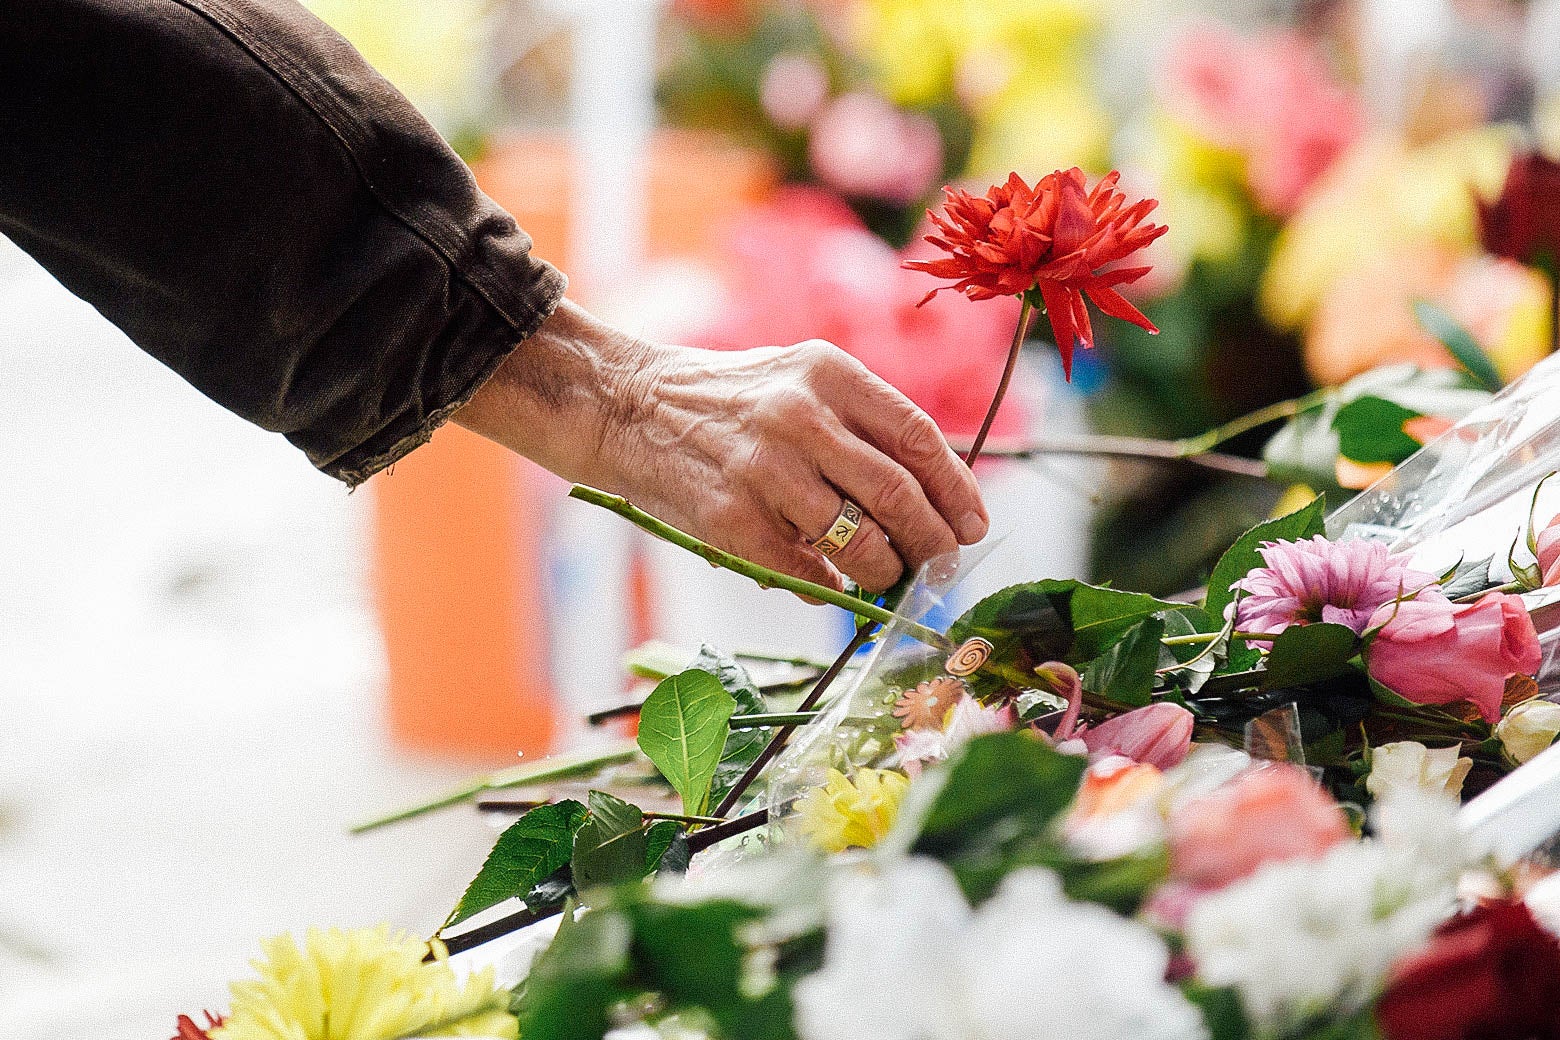 A hand reaching down to lay a flower on the memorial.